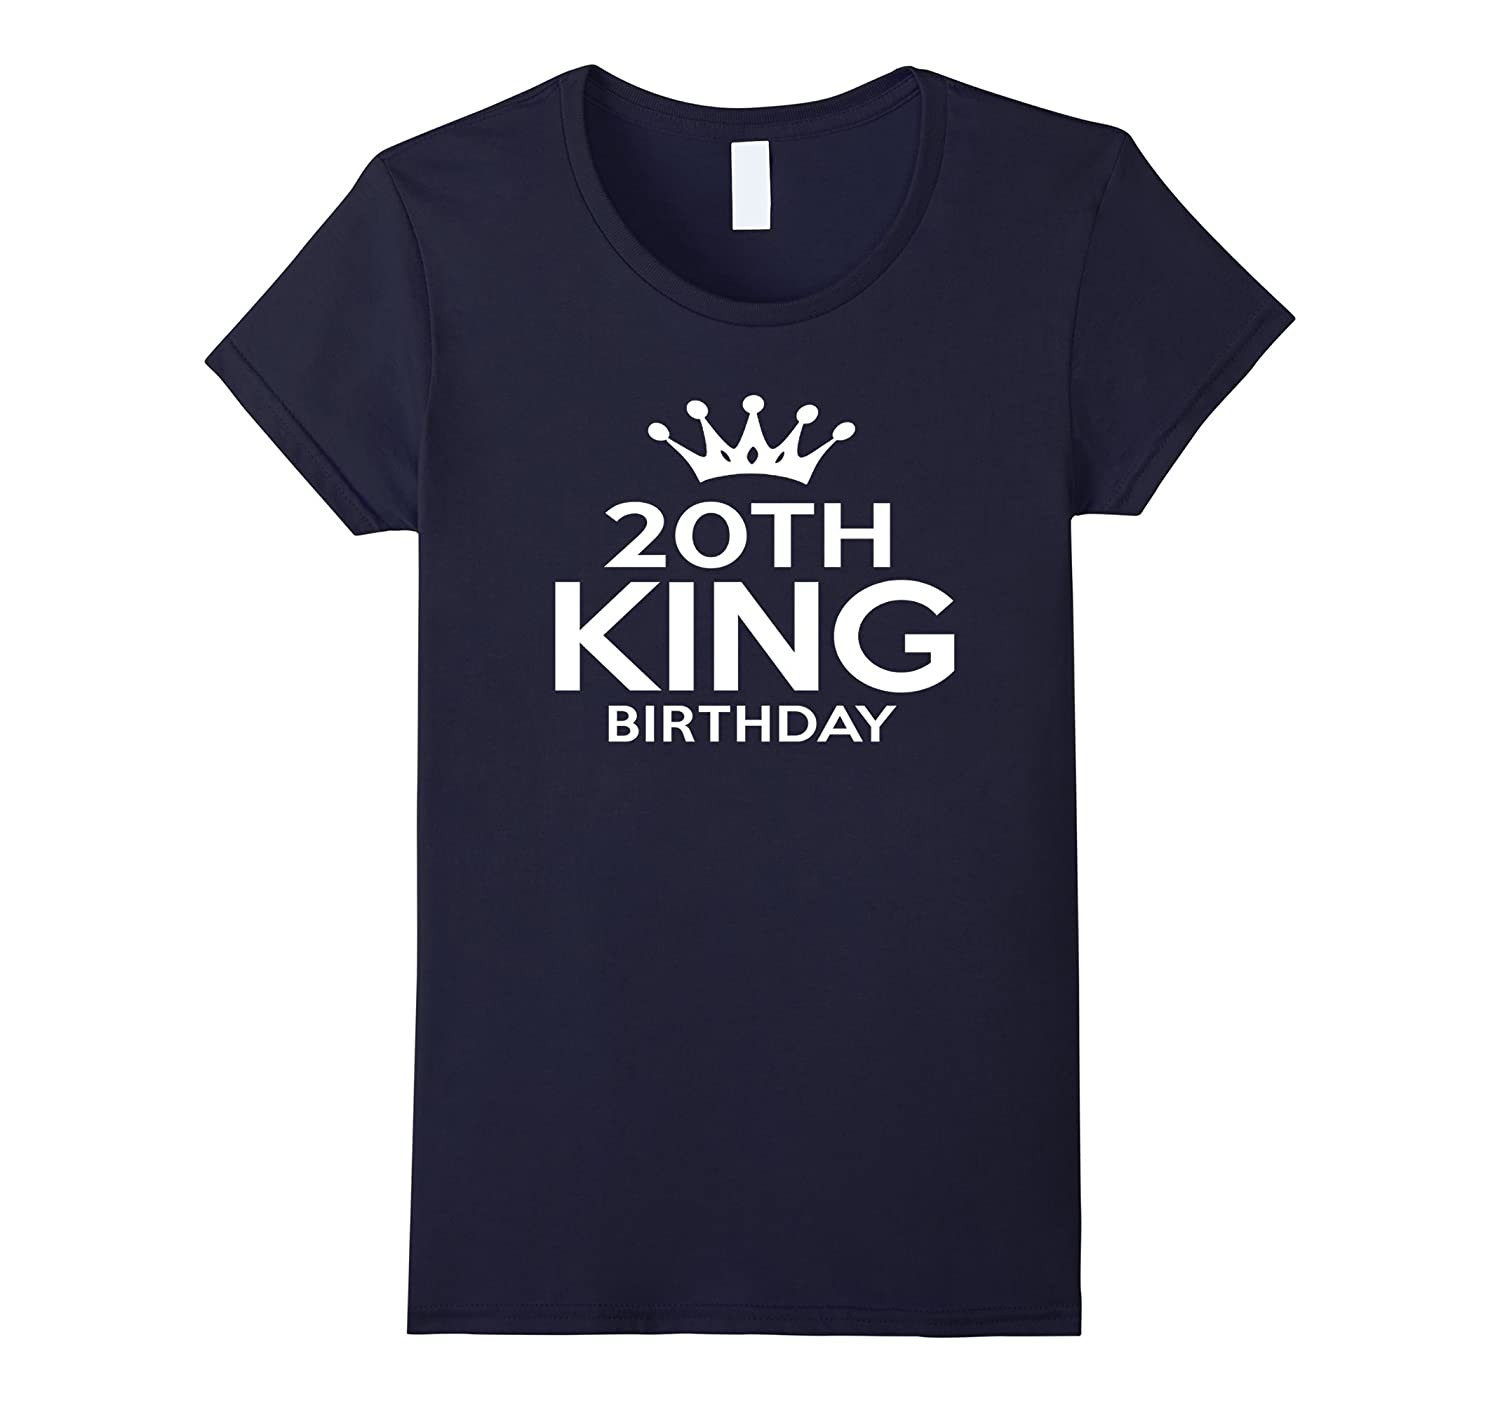 20Th Birthday Gift Ideas For Him
 20th King 20 Year Old 20th Birthday Gift Ideas for him